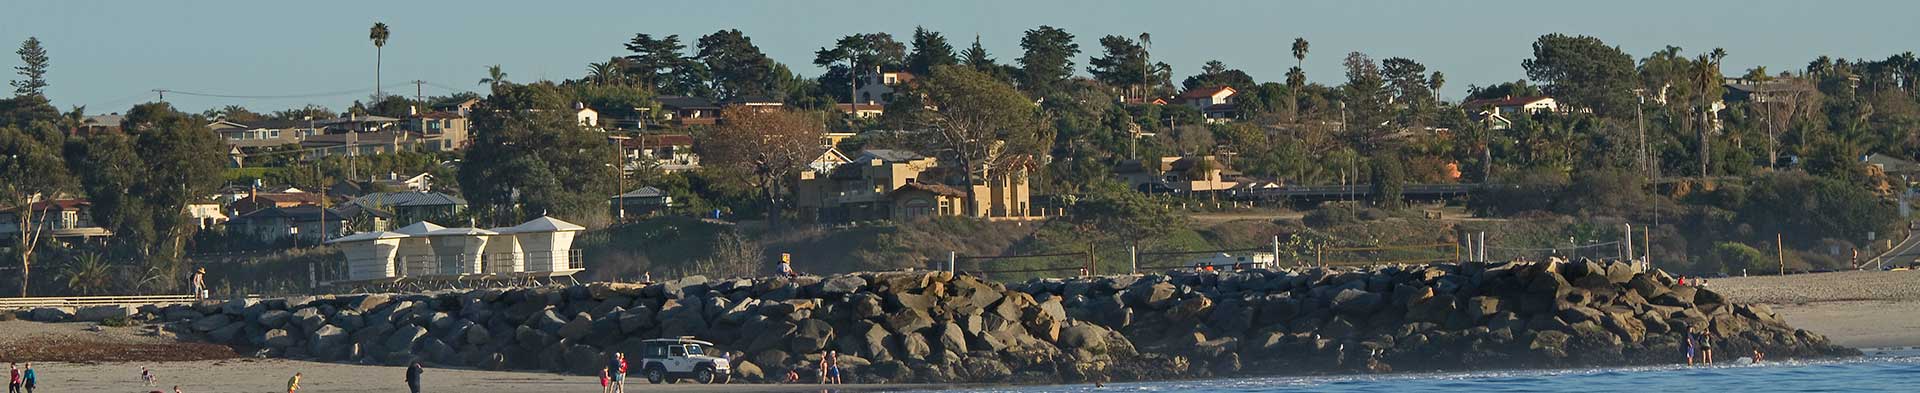 A view of North County Coastal from the beach.